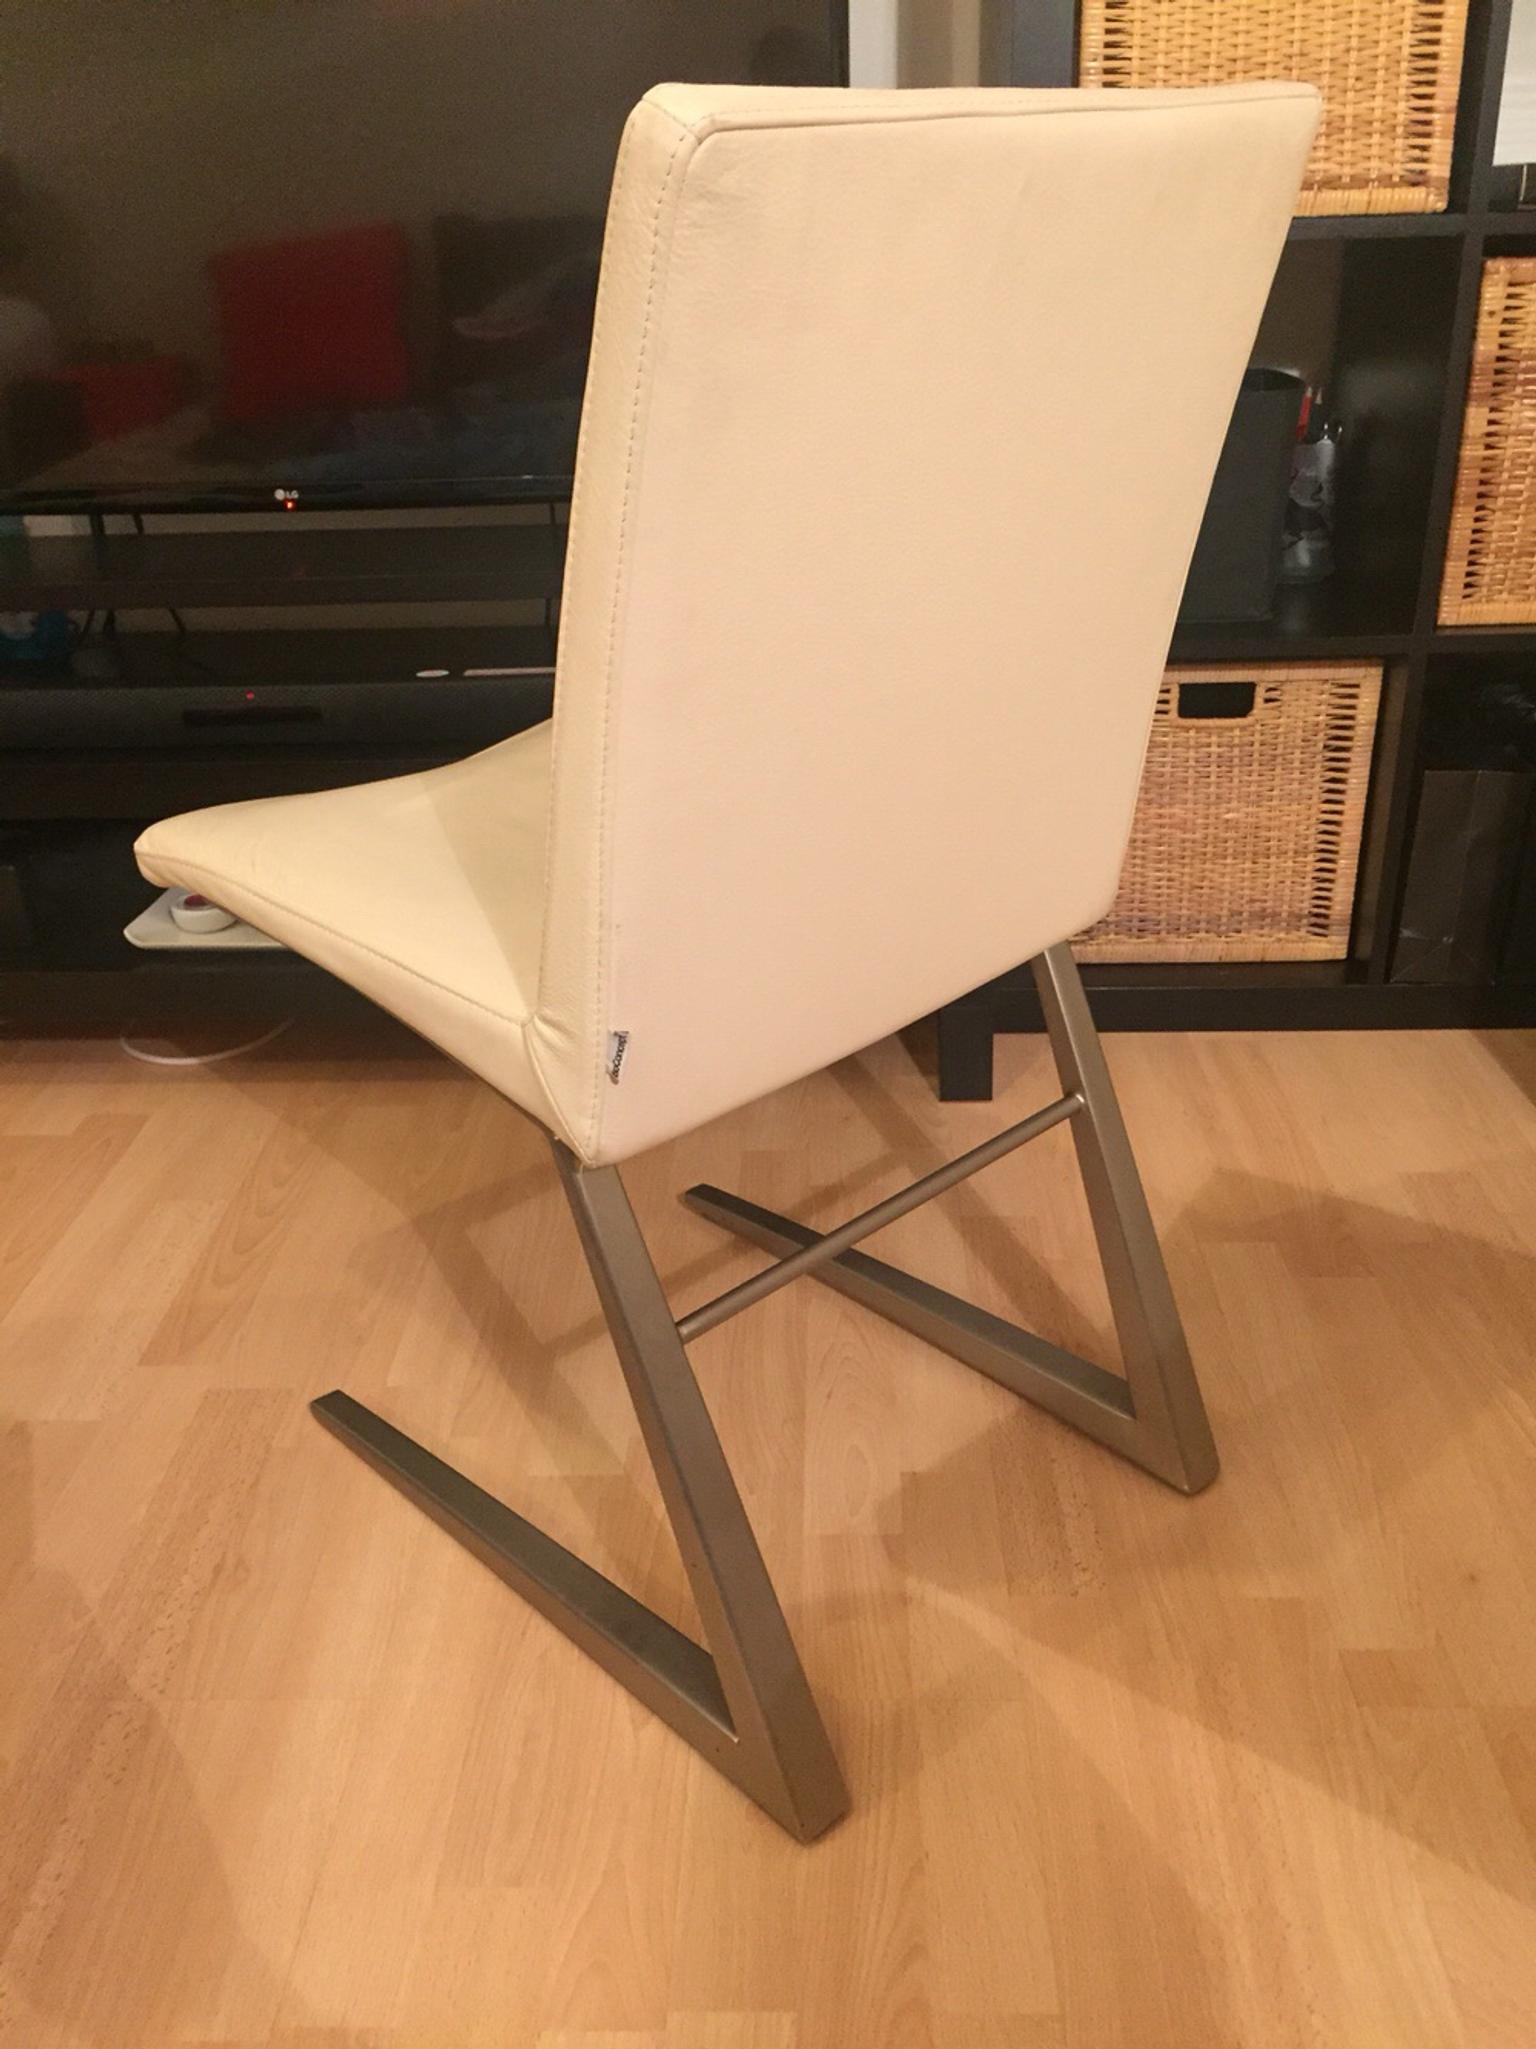 4 X Boconcept Mariposa Dining Chairs In W5 London For 380 00 For